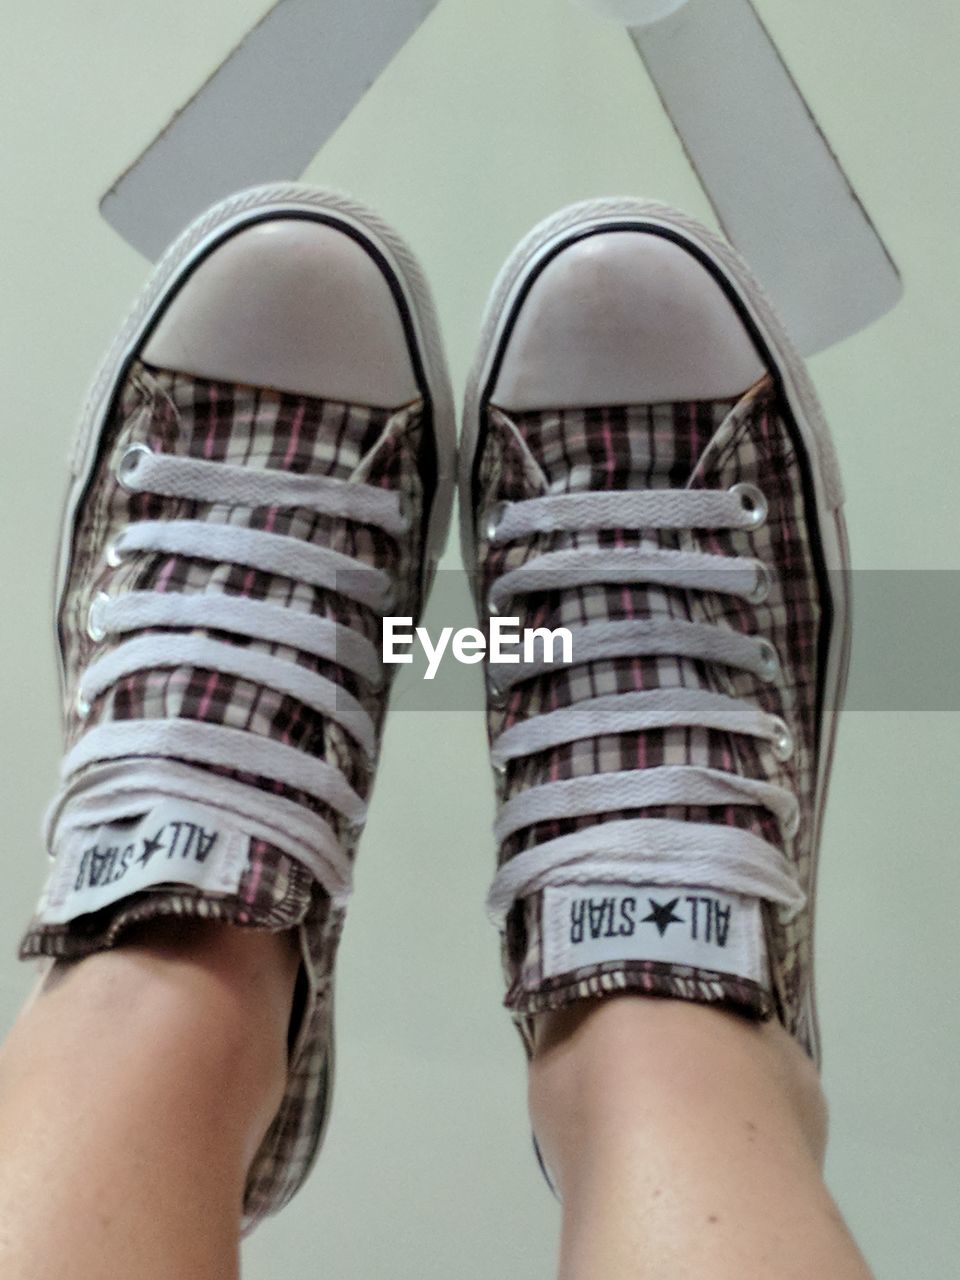 The Week On EyeEm From My Eye Of View The Purist (no Edit, No Filter) Eyemgallery New Kicks Converse All Star Plaid Shoes One Woman Only One Person Fashion People Human Body Part Close-up Adults Only Adult Only Women Indoors  Studio Shot Low Section One Young Woman Only Day EyeEm Connected By Travel The Still Life Photographer - 2018 EyeEm Awards The Creative - 2018 EyeEm Awards My Best Photo